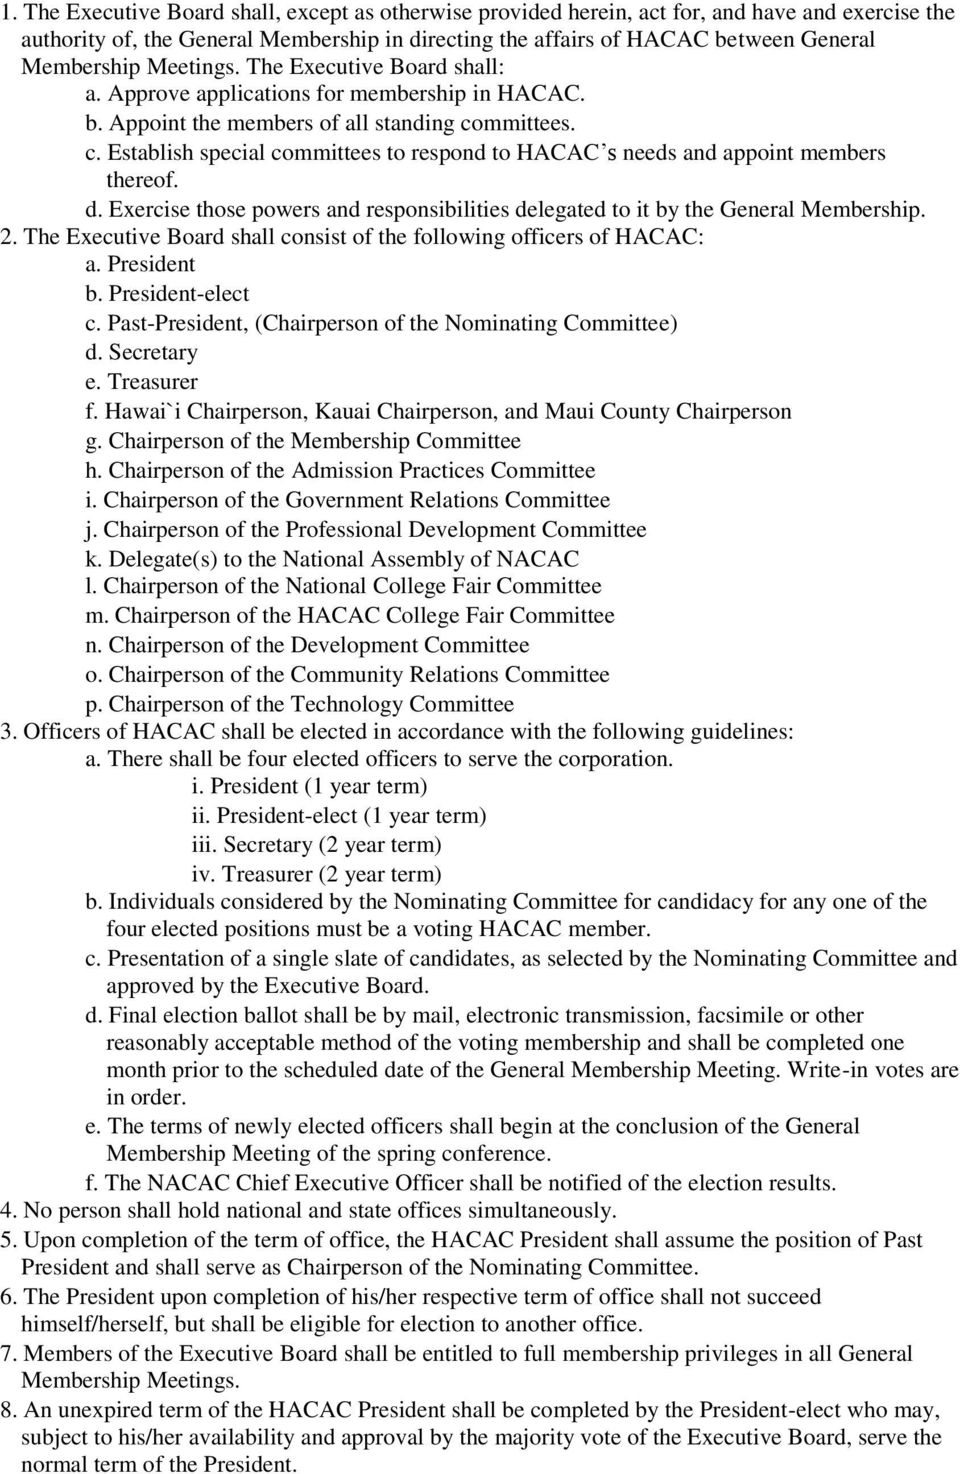 mmittees. c. Establish special committees to respond to HACAC s needs and appoint members thereof. d. Exercise those powers and responsibilities delegated to it by the General Membership. 2.